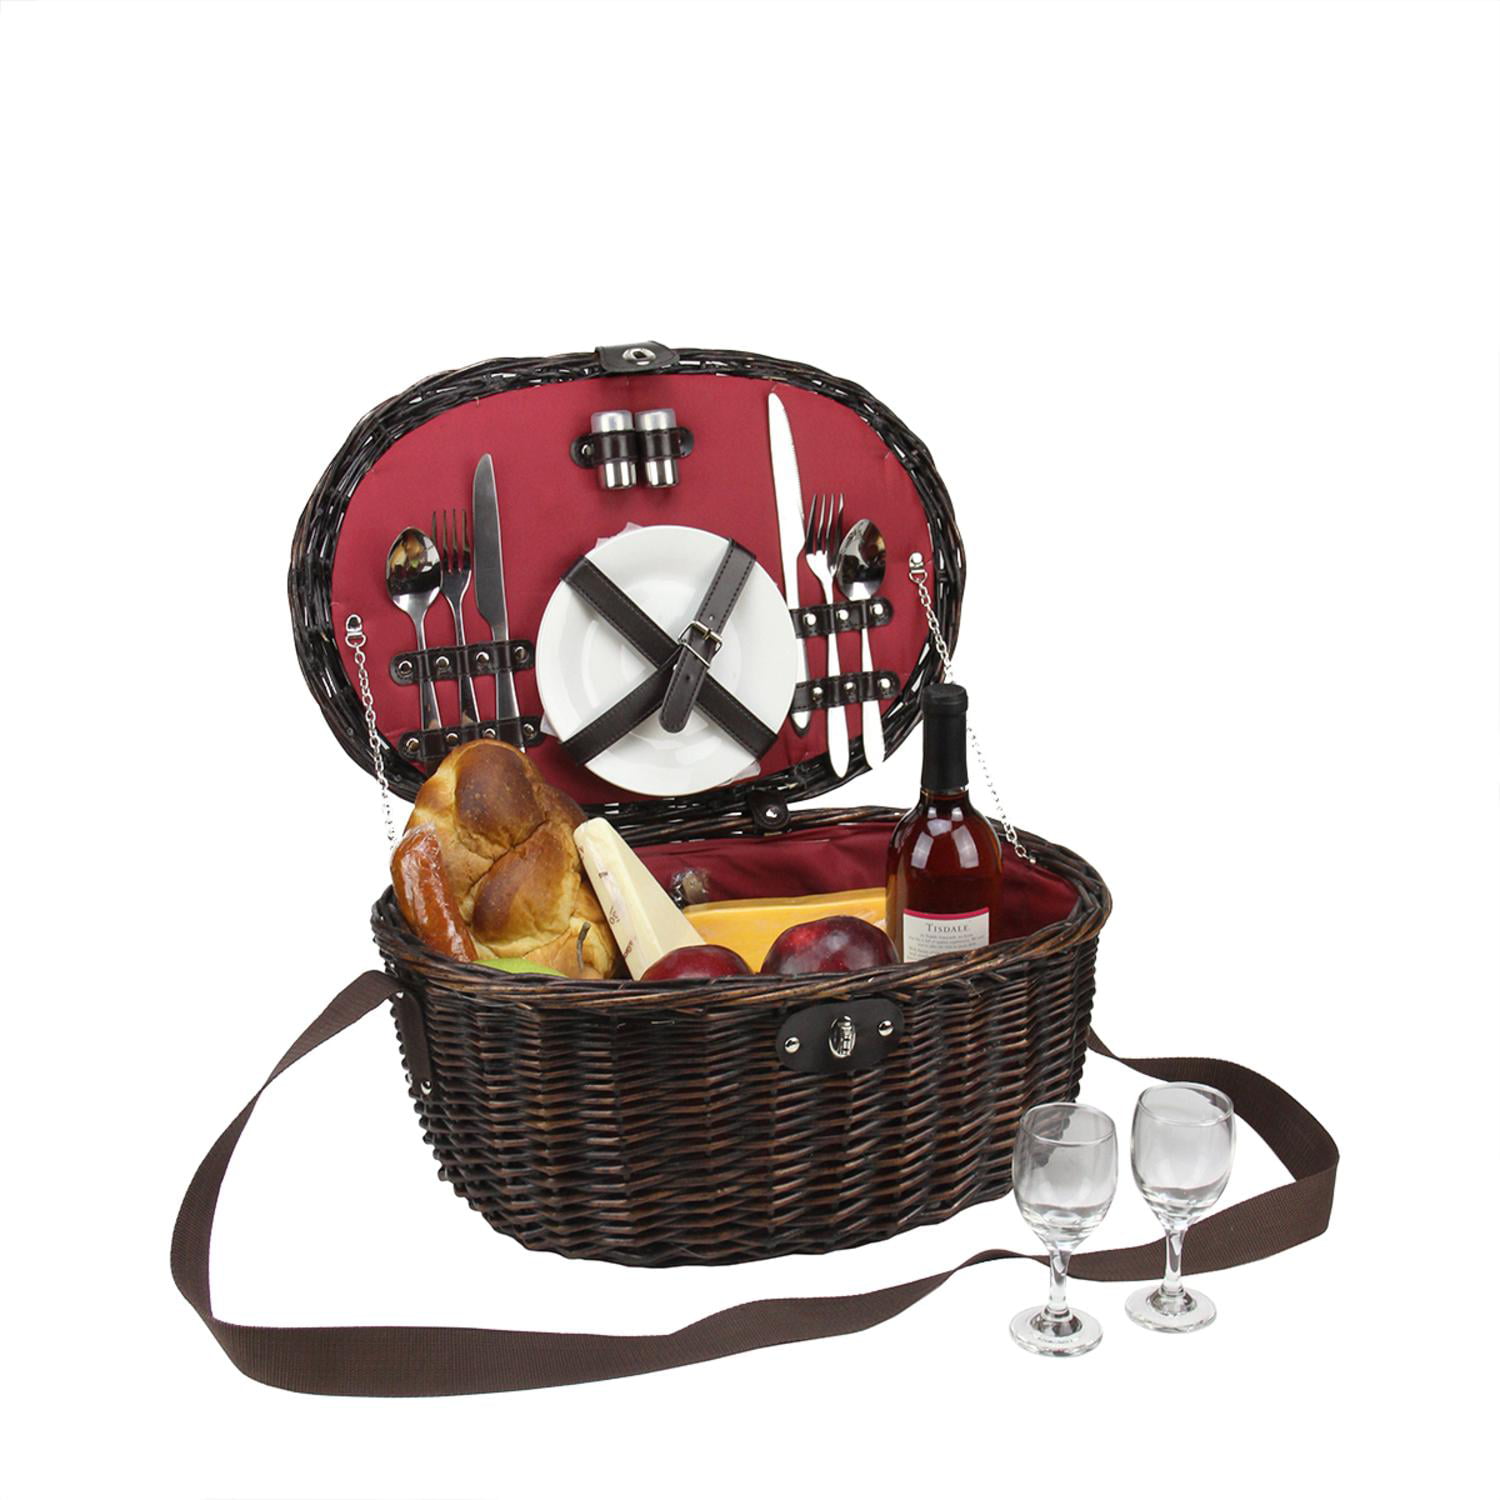 Northlight 2-Person Hand Woven Red Sateen Chocolate Brown Willow Picnic Basket Set with Accessories 